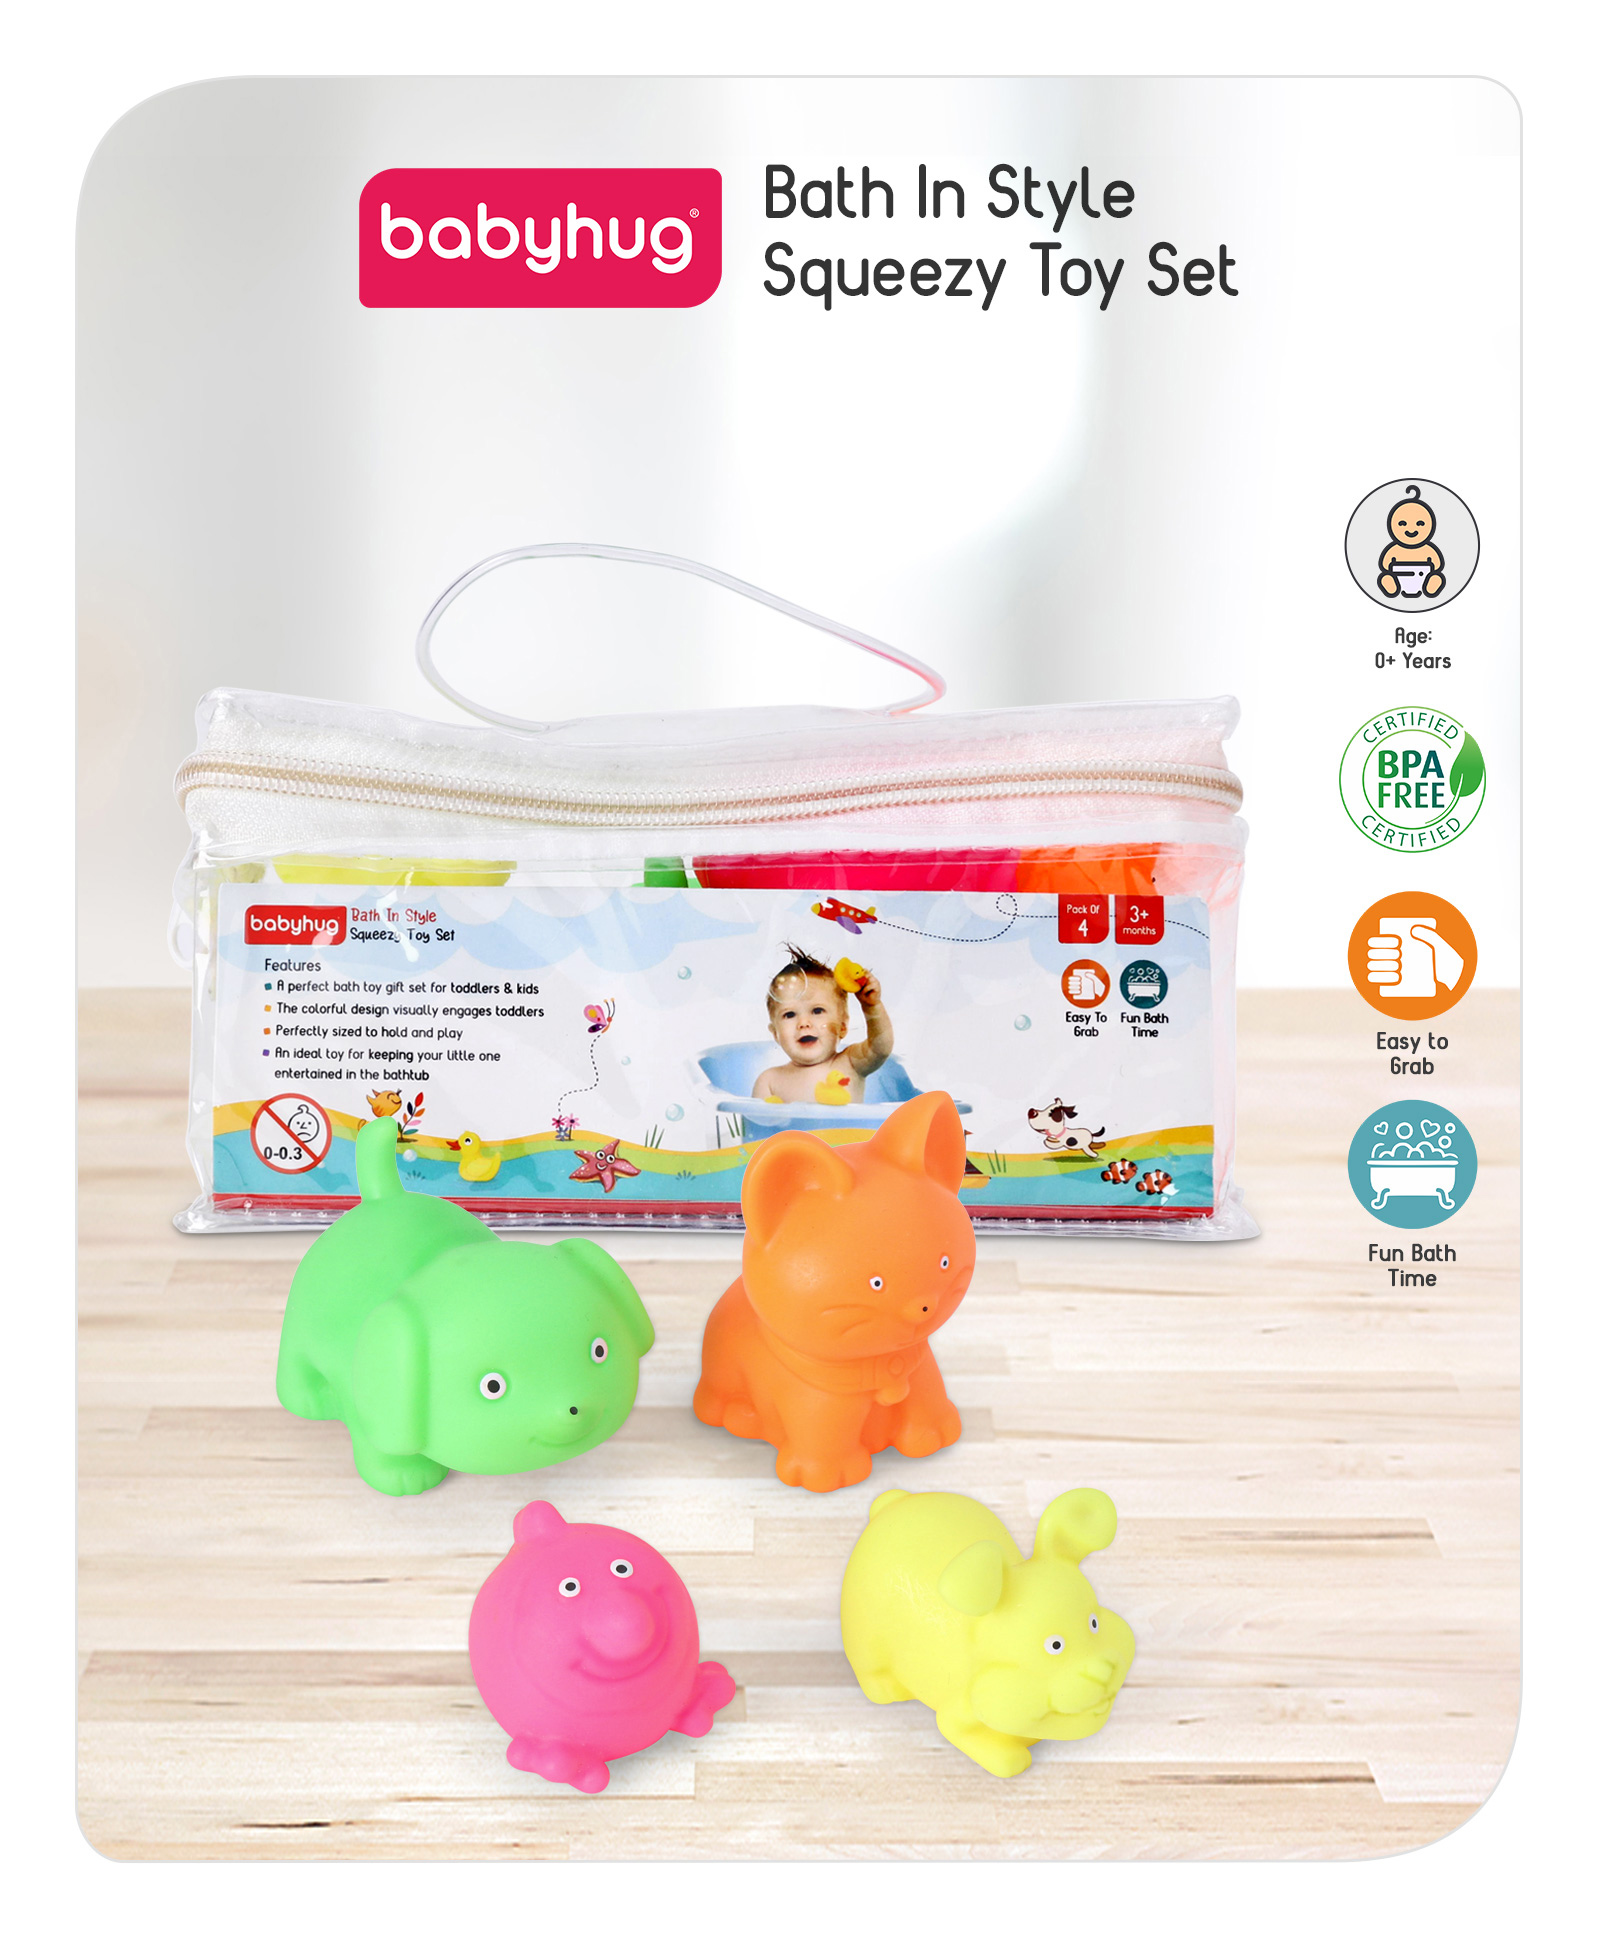 Babyhug Bath In Style Squeezy Toy Set Pet Animals Pack of 4 (Color May  Vary) Online India, Buy Bath Toys for (0-24 Months) at  -  10064108